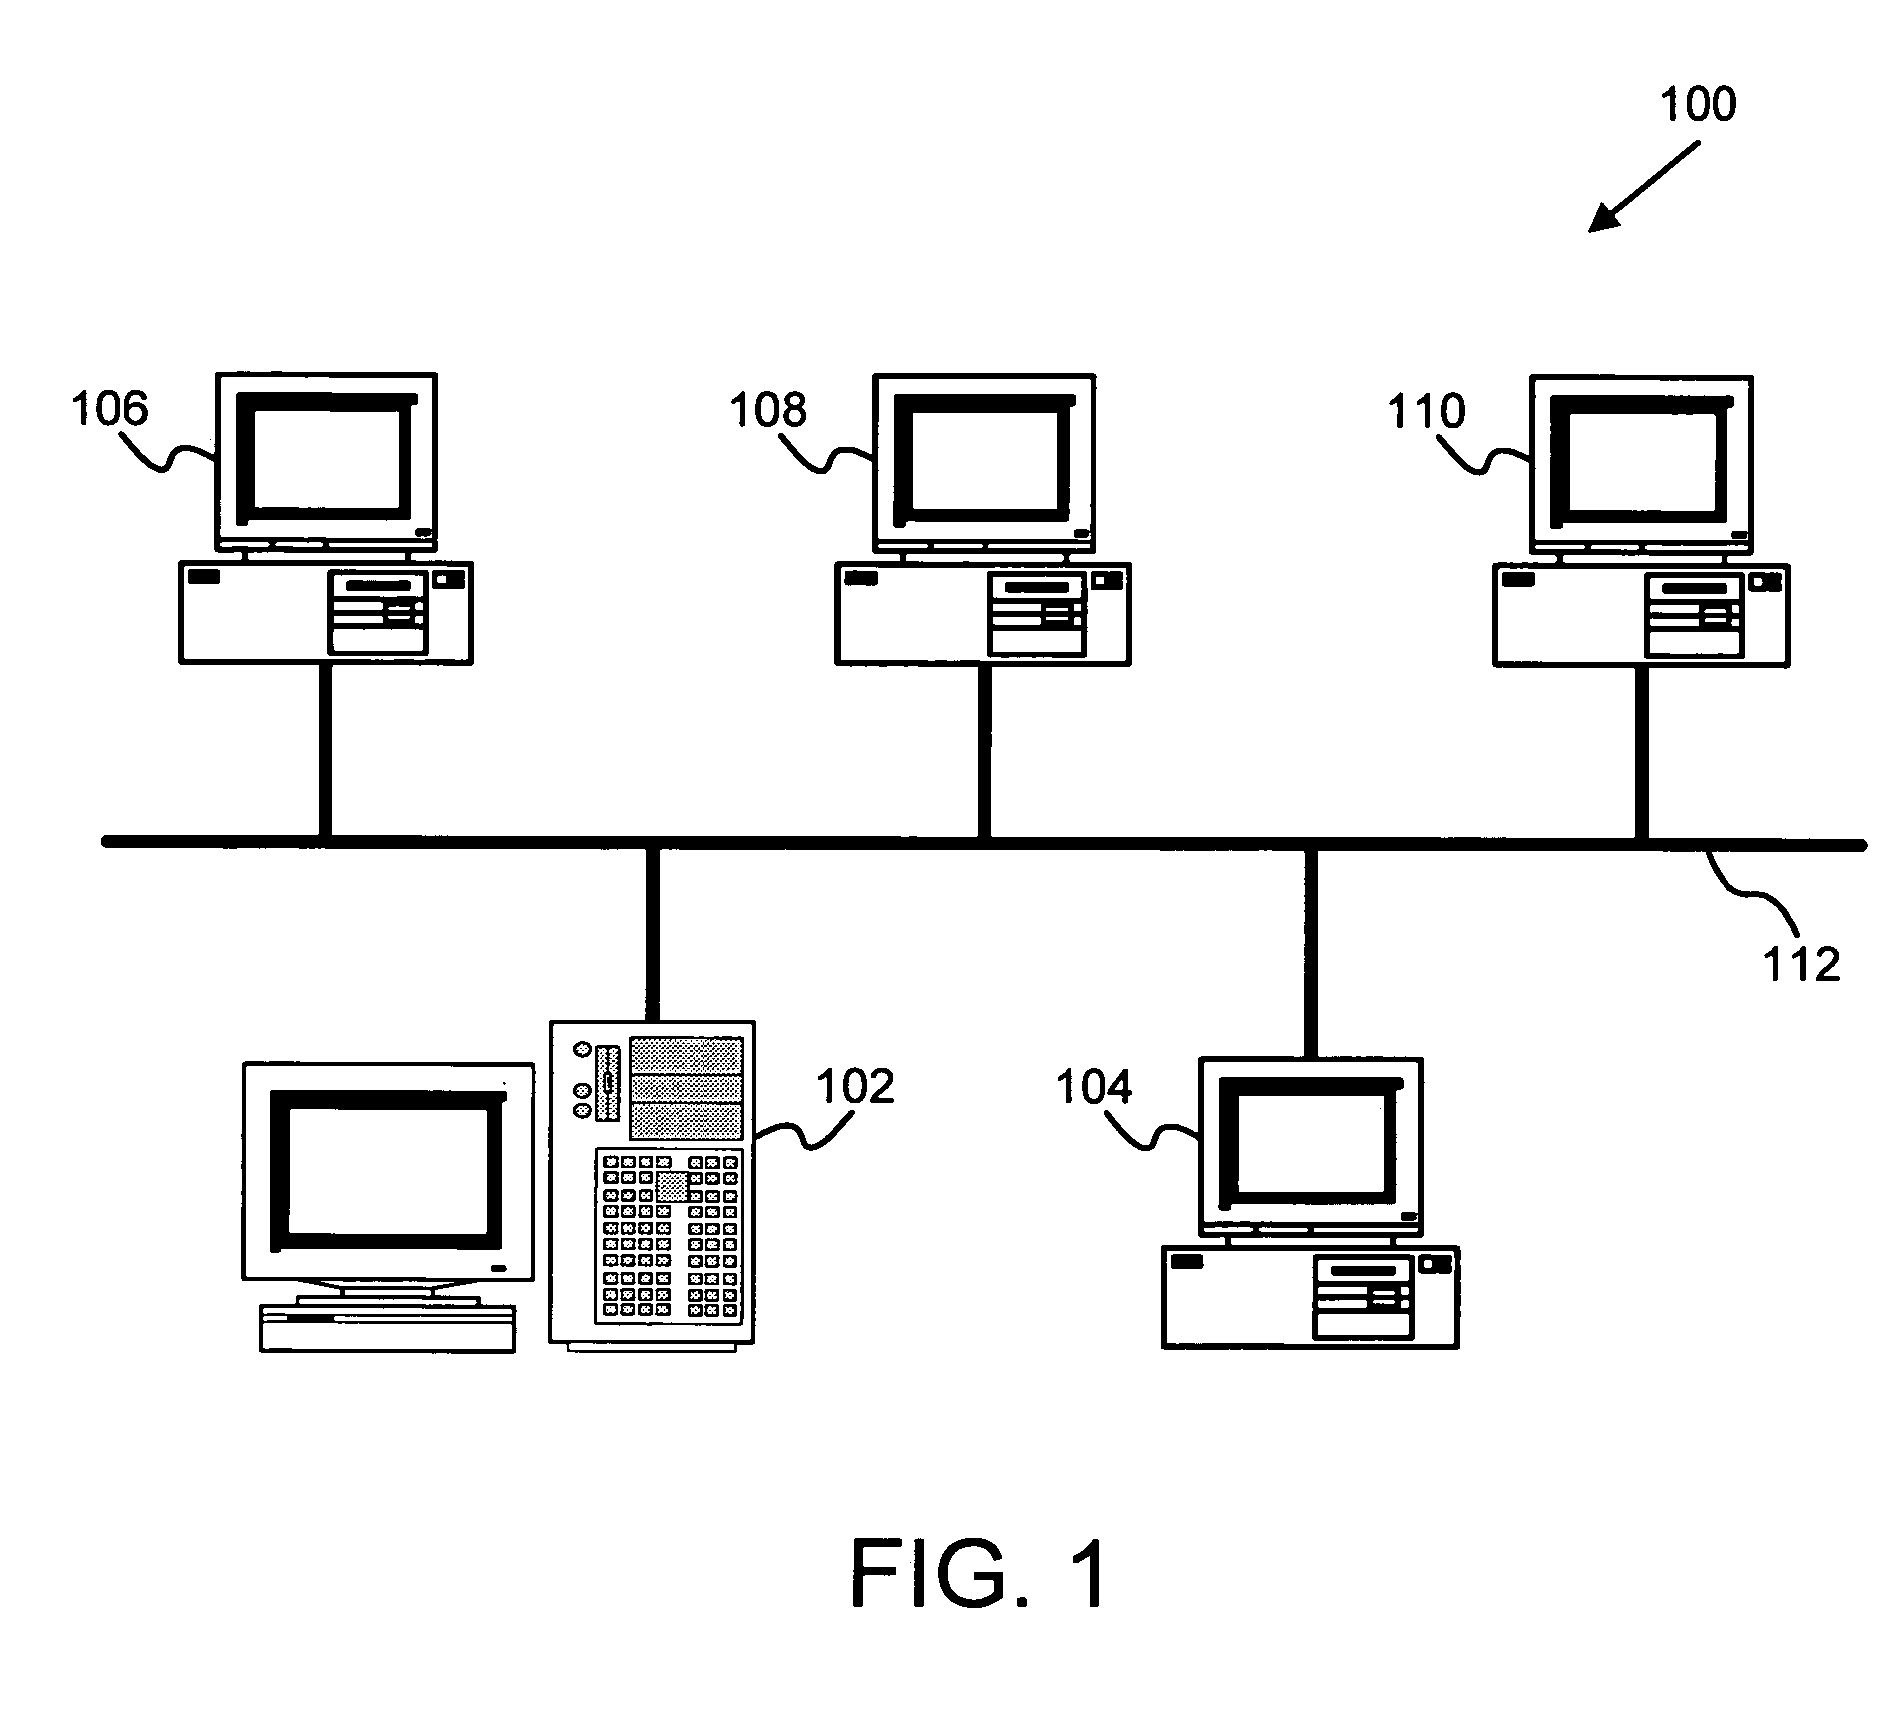 Apparatus, system, and method for autonomic control of grid system resources